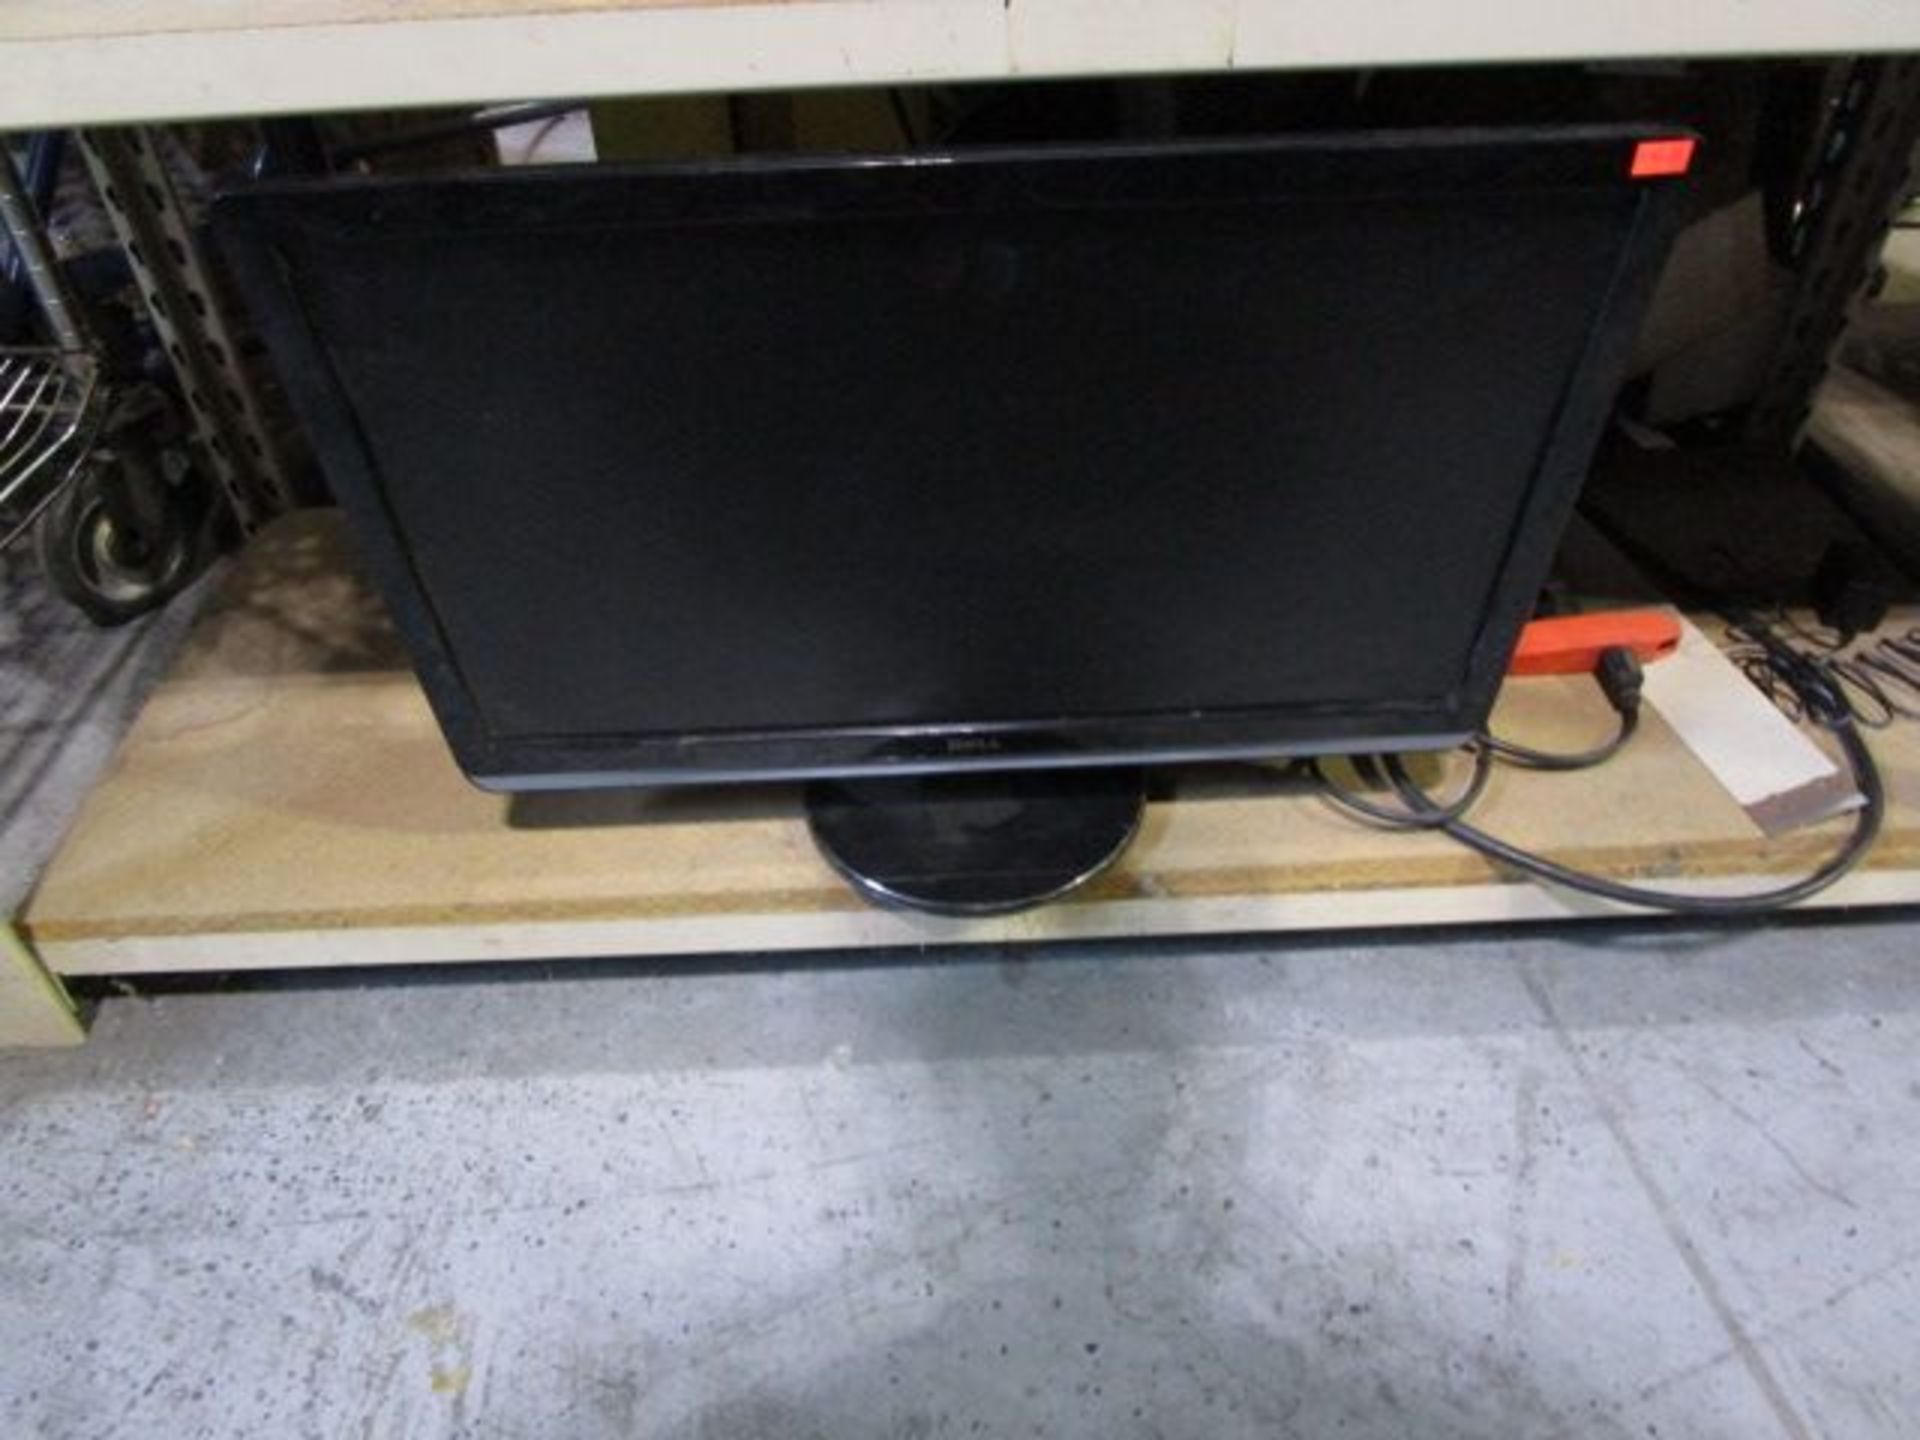 SHELVING UNIT OF SPEAKERS AND MONITOR - Image 5 of 5